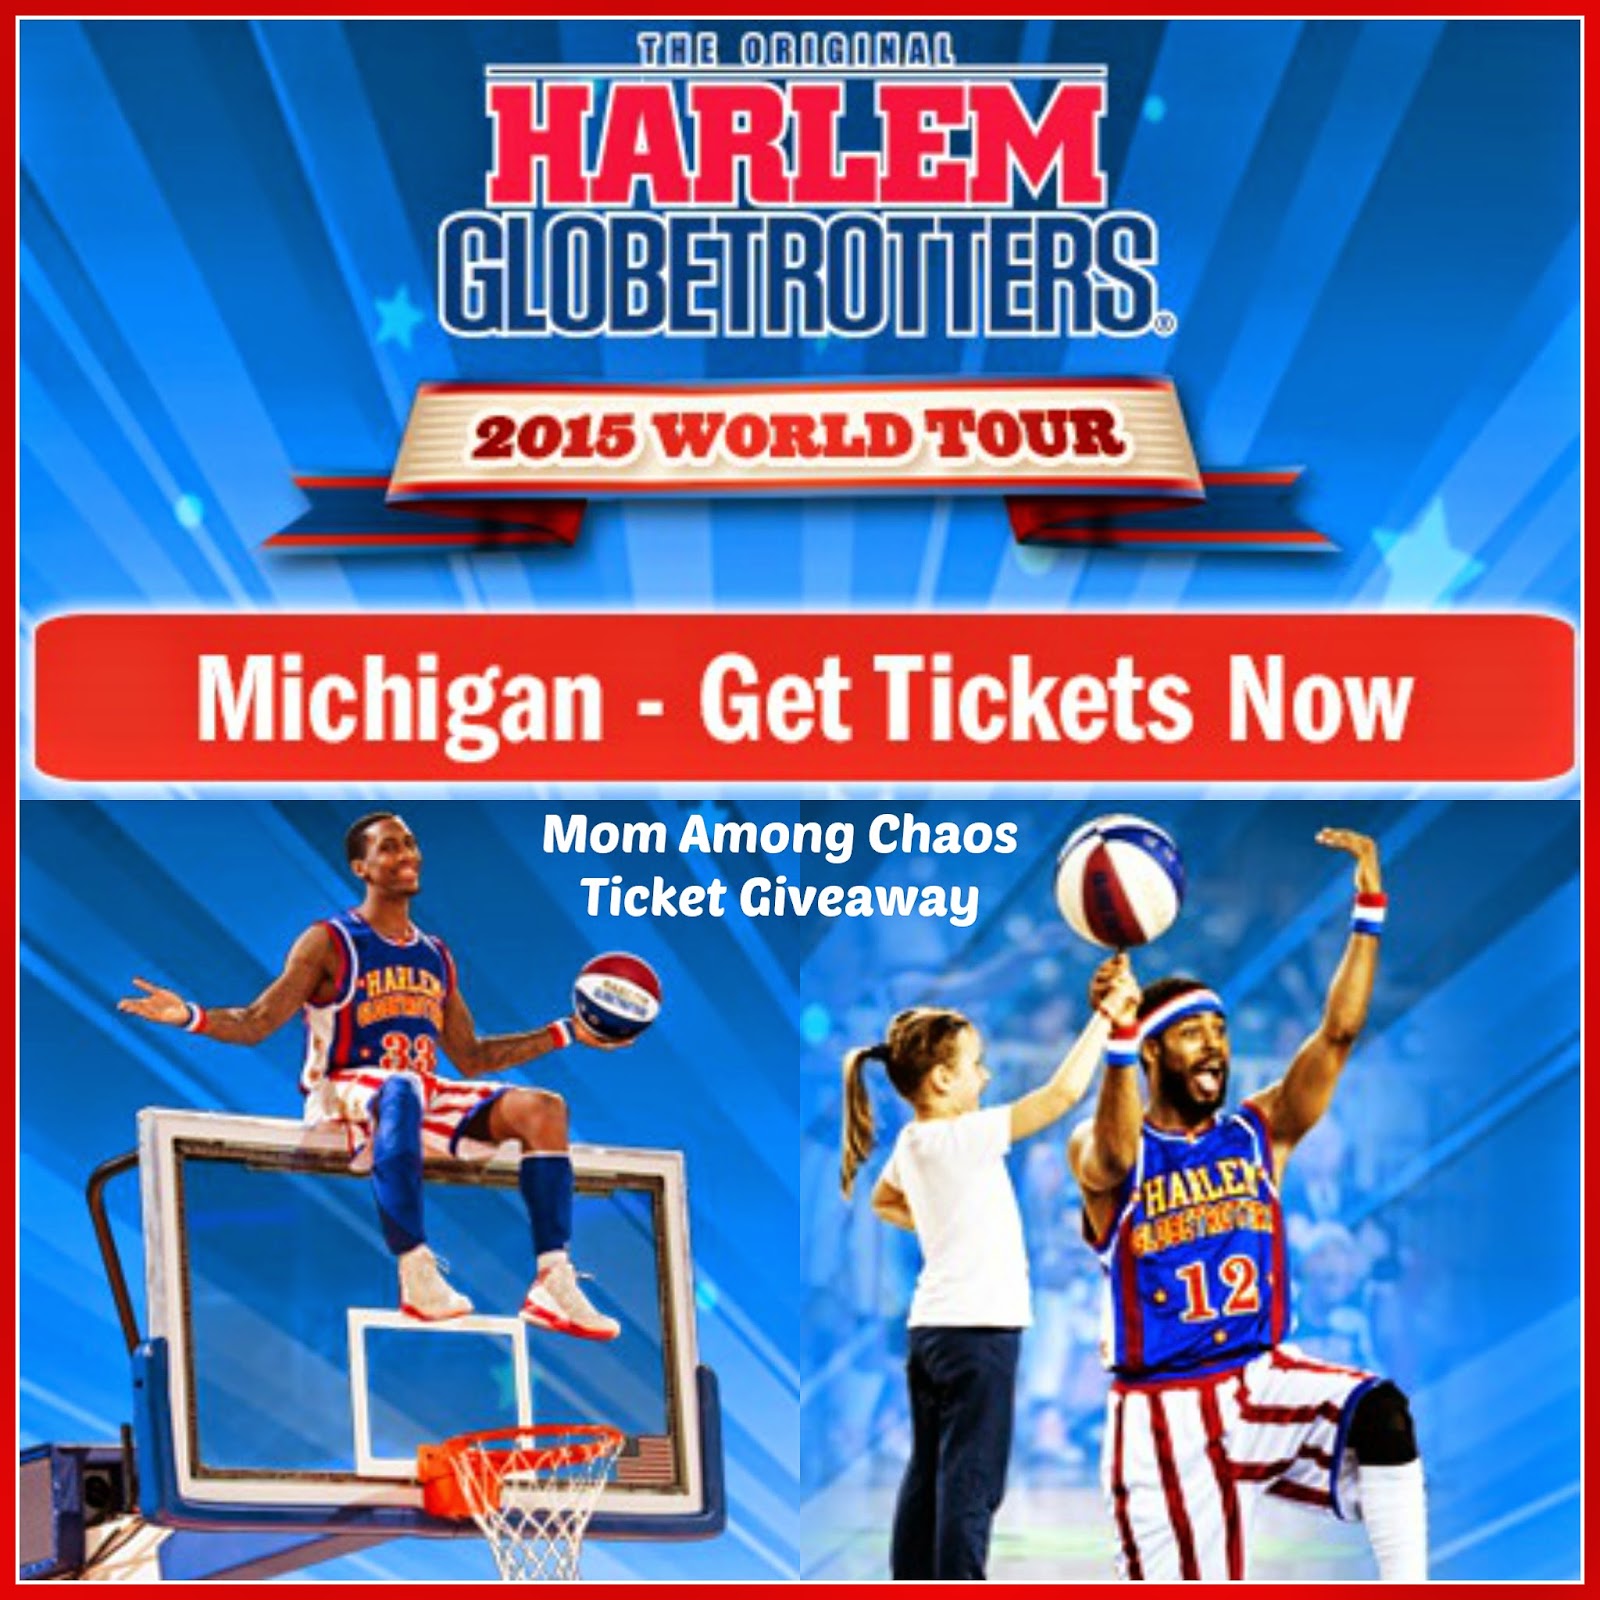 harlem globetrotters, baskeball, family, fun, event, entertainment, The Palace of Auburn Hills, Detroit, giveaway, photos,